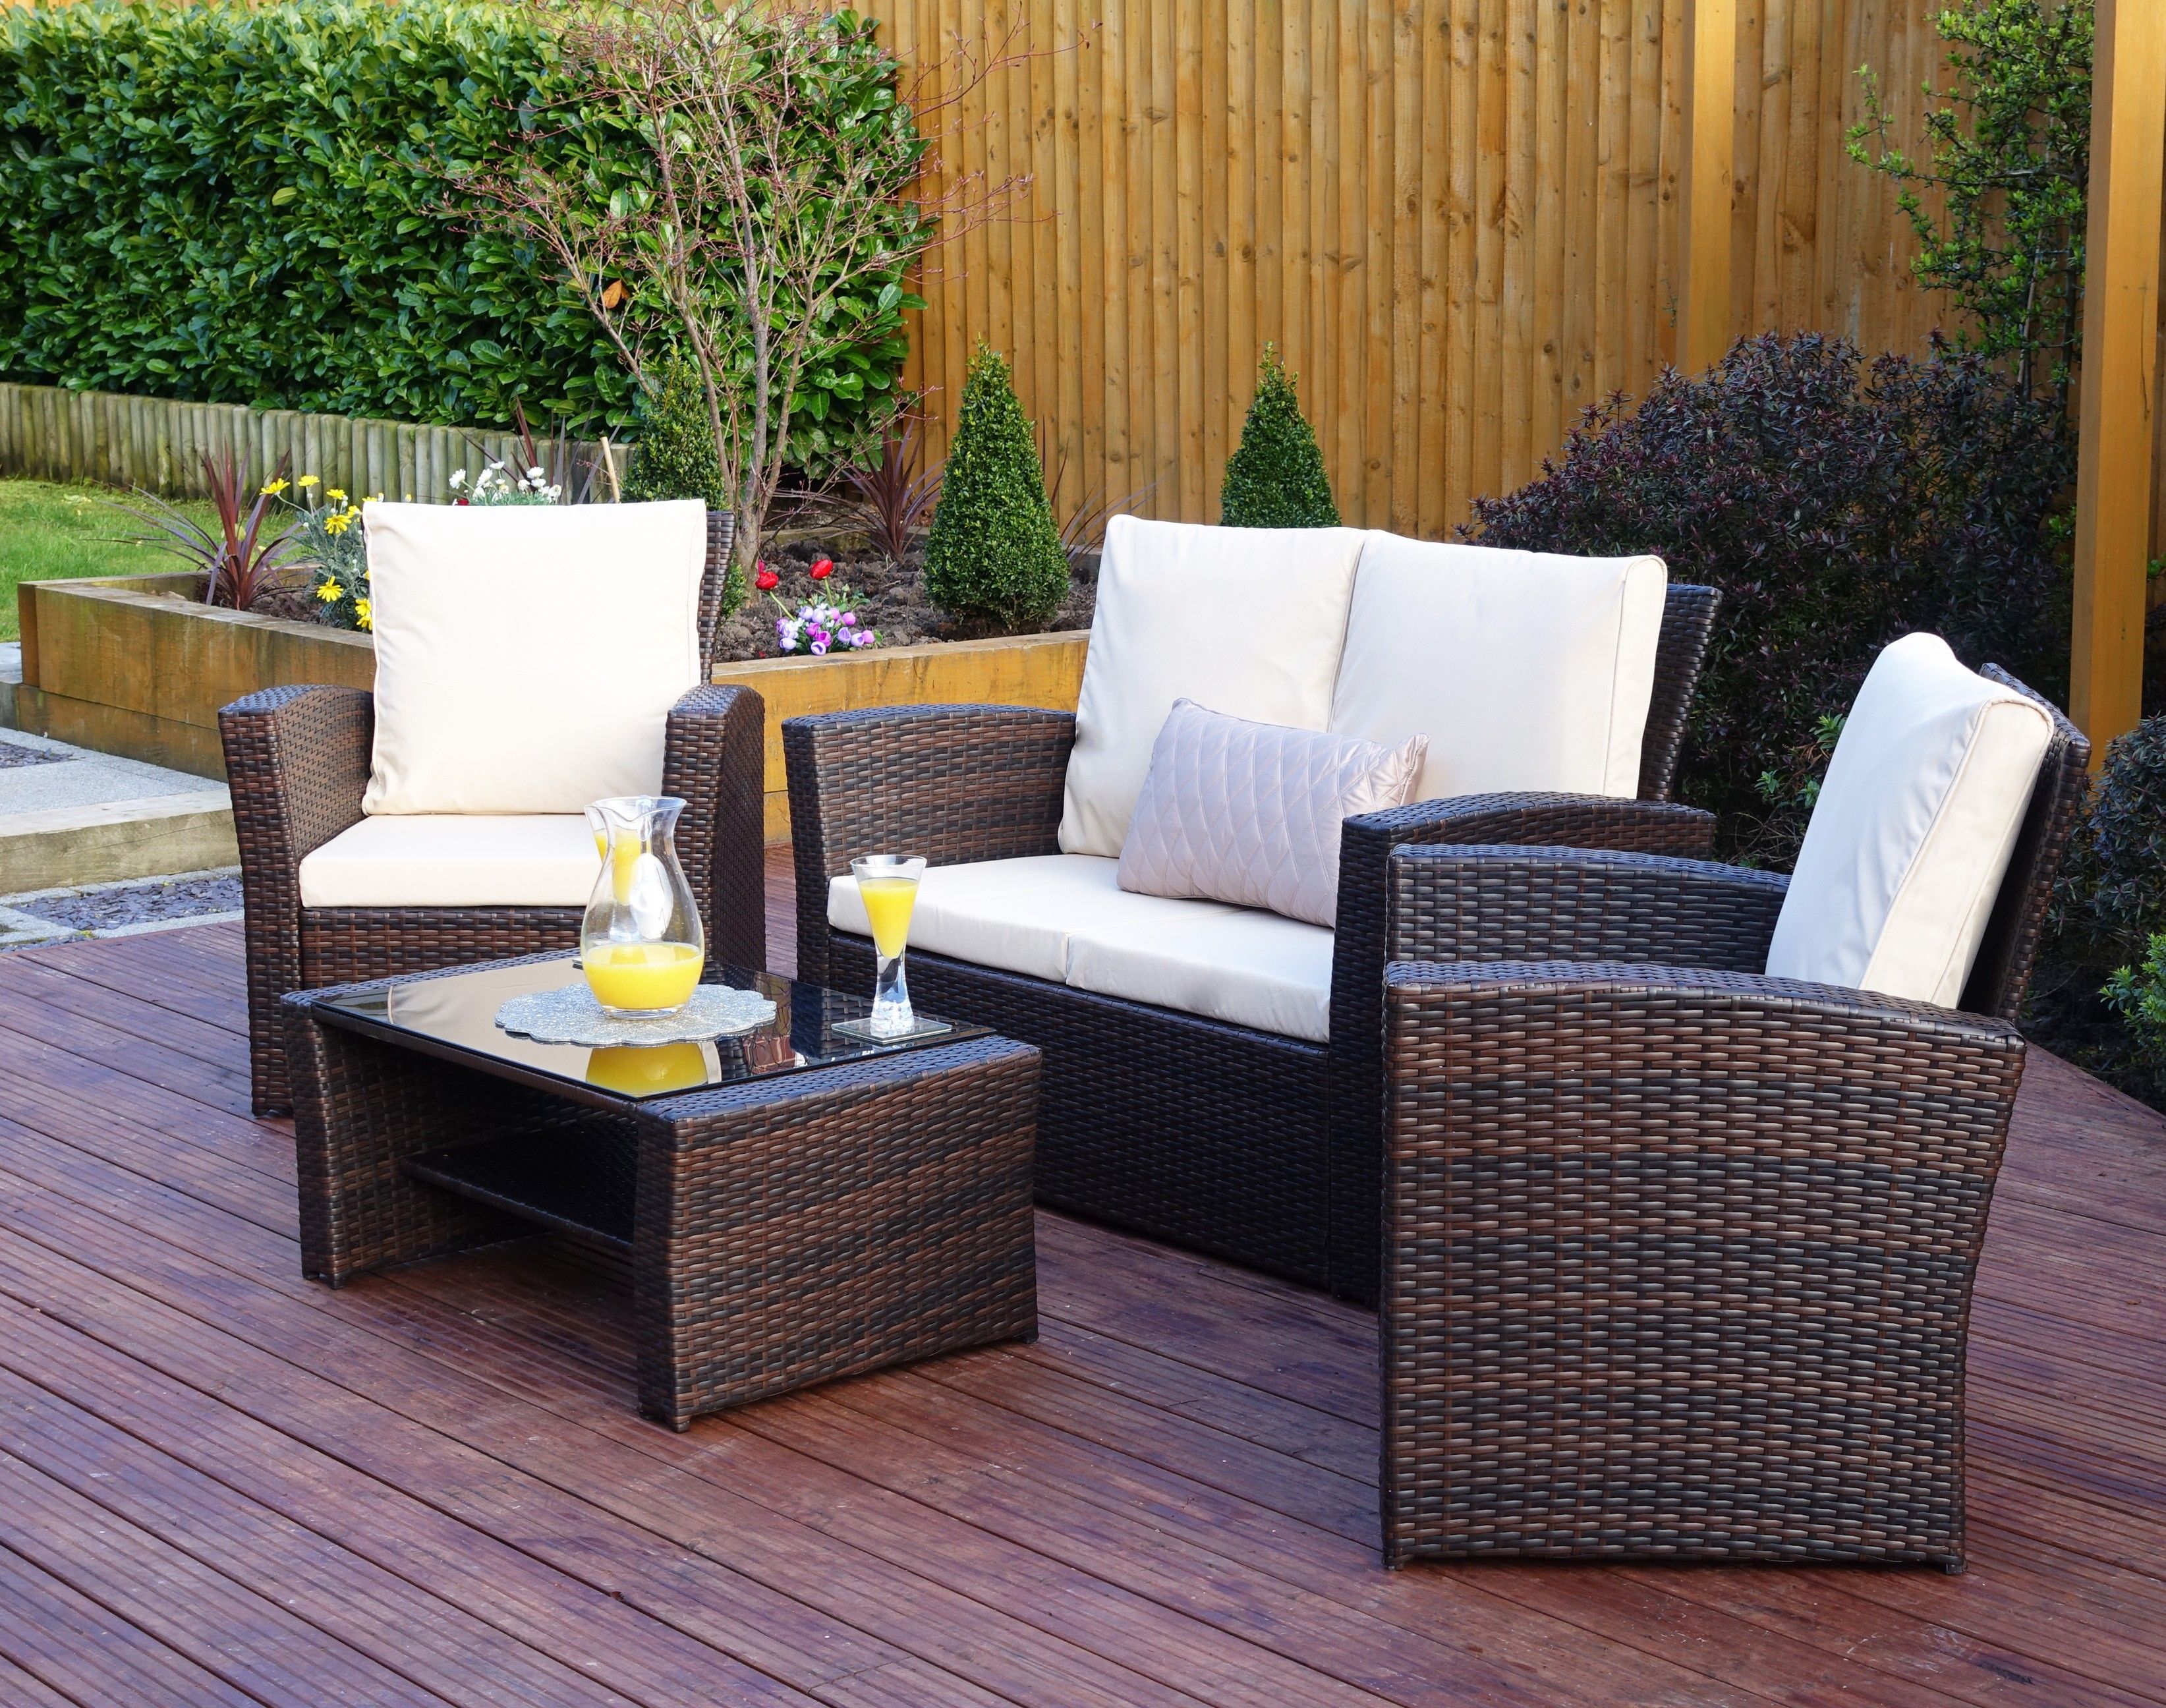 Great Rattan Garden Furniture Ideas That
  You Can Share With Your Friends